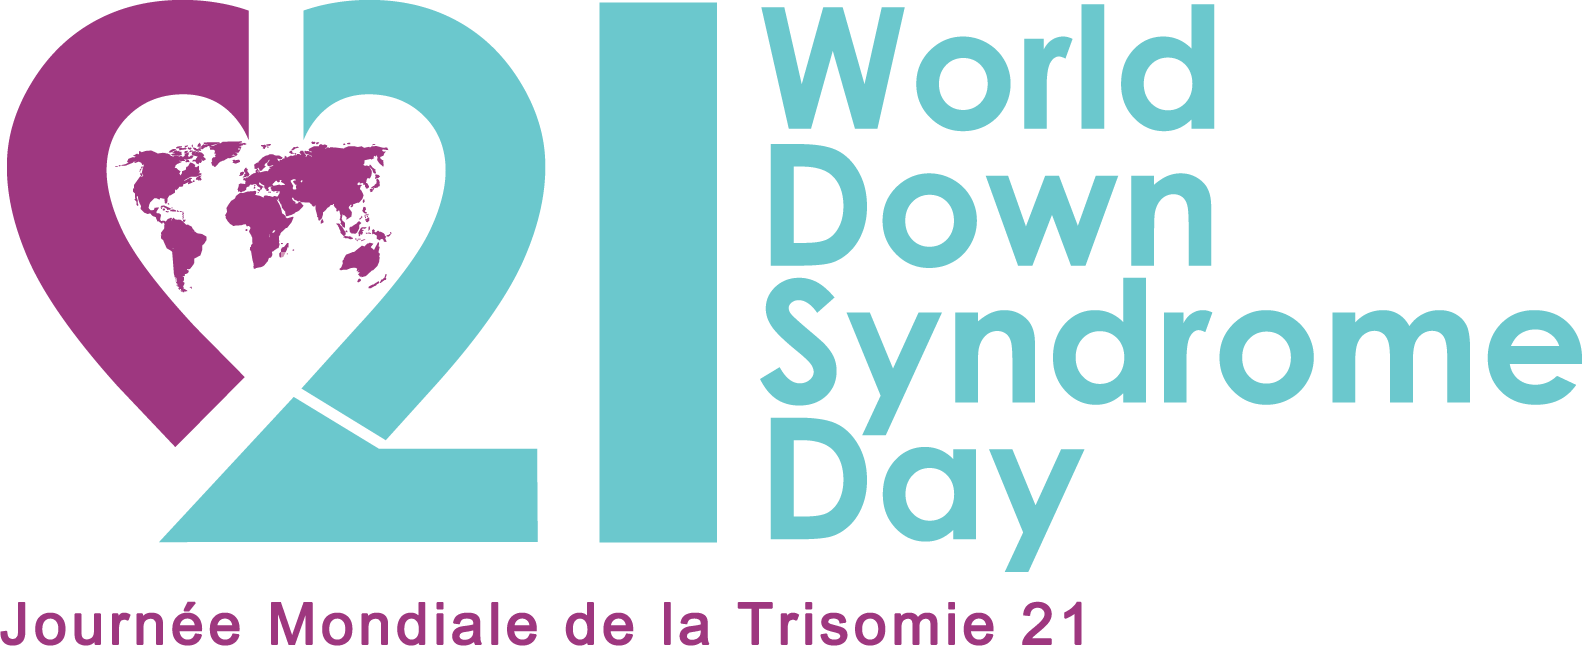 World Down Syndrome Day 21 March Image I Nations